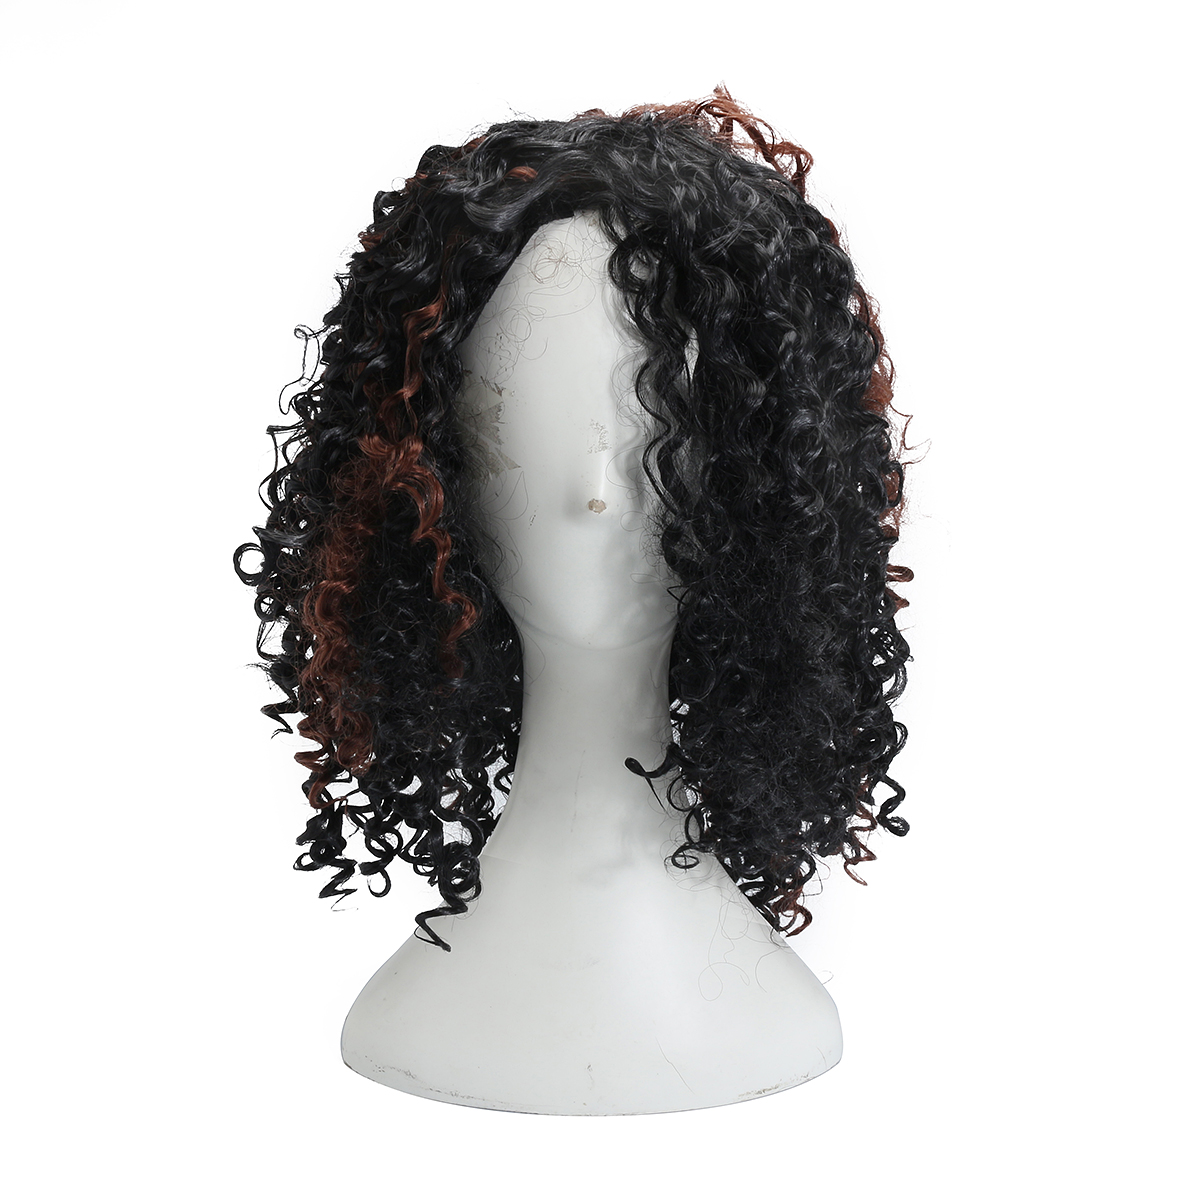 Brazilian-Black-Brown-Hair-Deep-Wavy-Curly-Lace-Front-Full-Wig-1230999-1